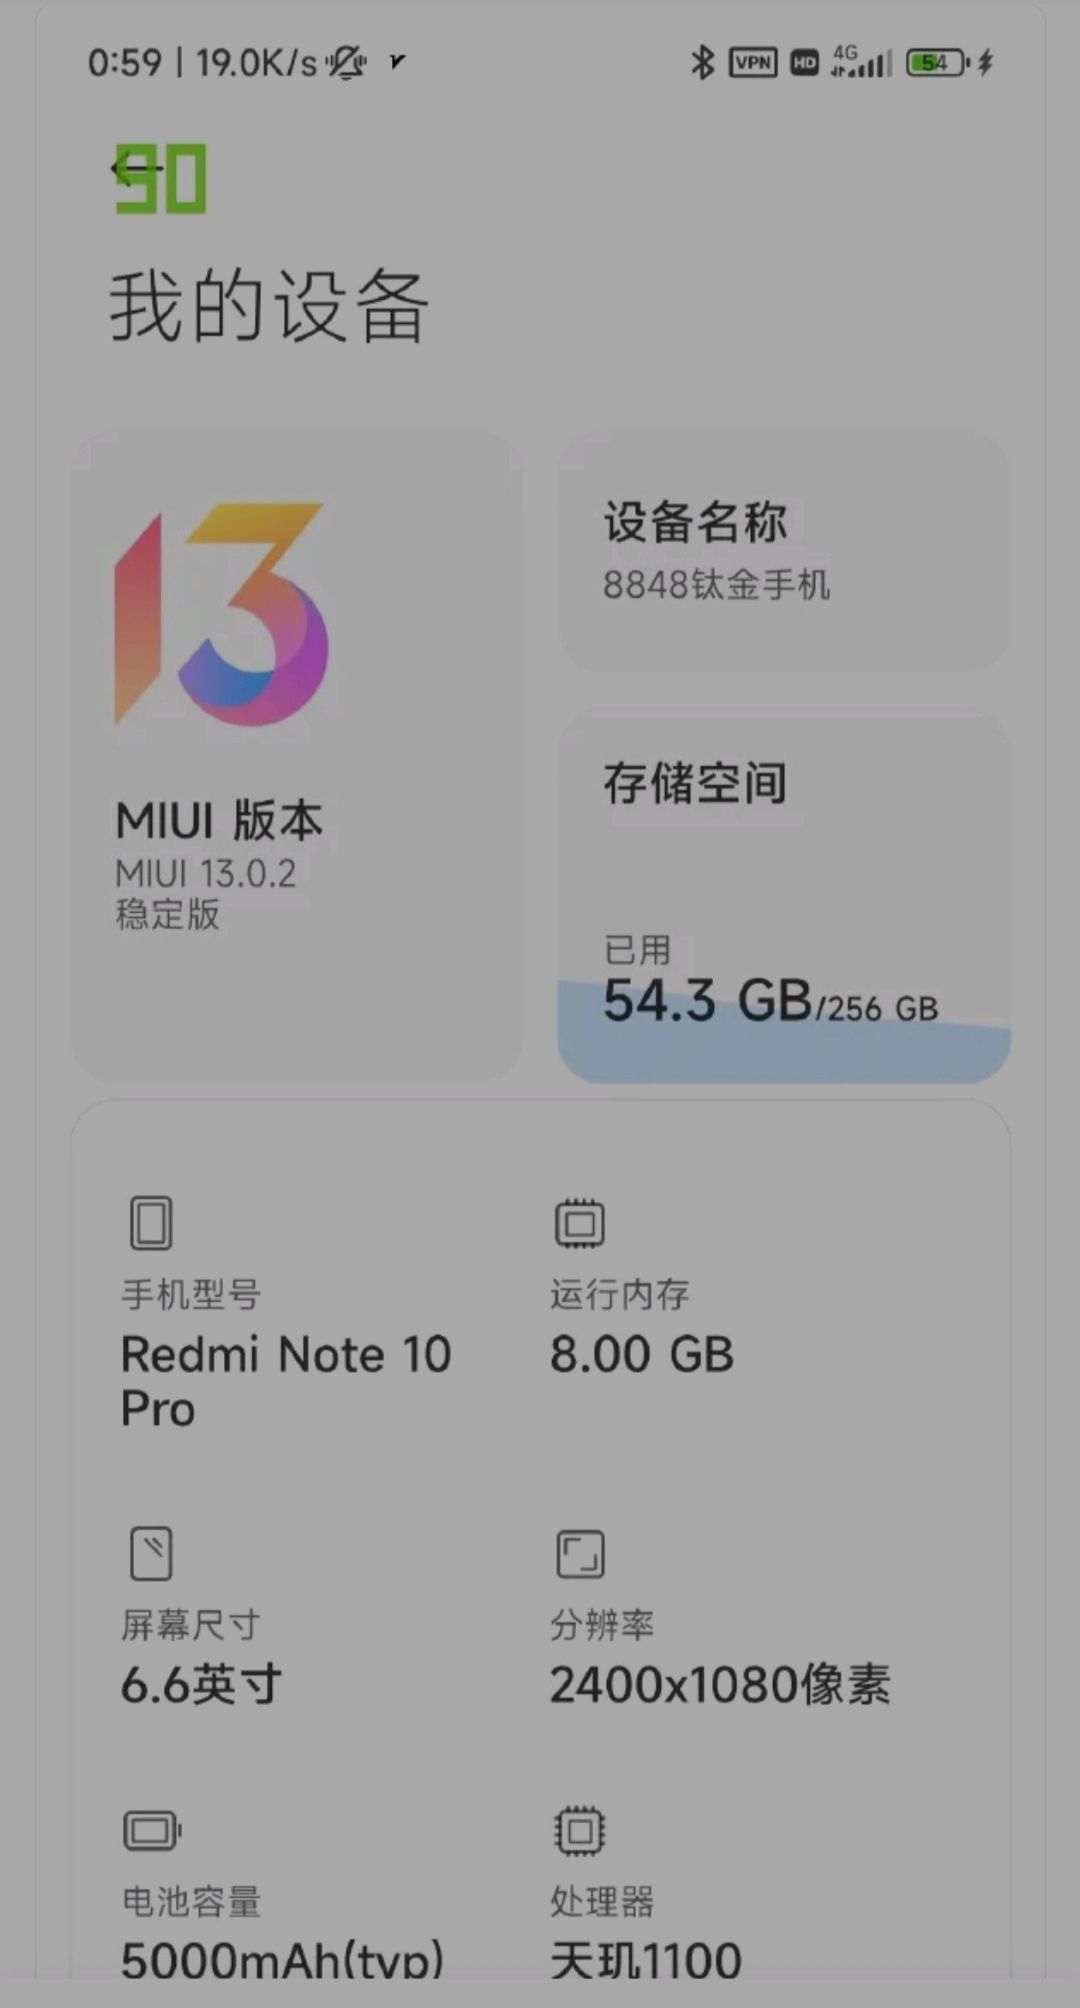 Redmi Note 10 Pro 5G / POCO X3 GT Android 12-based MIUI 13 update